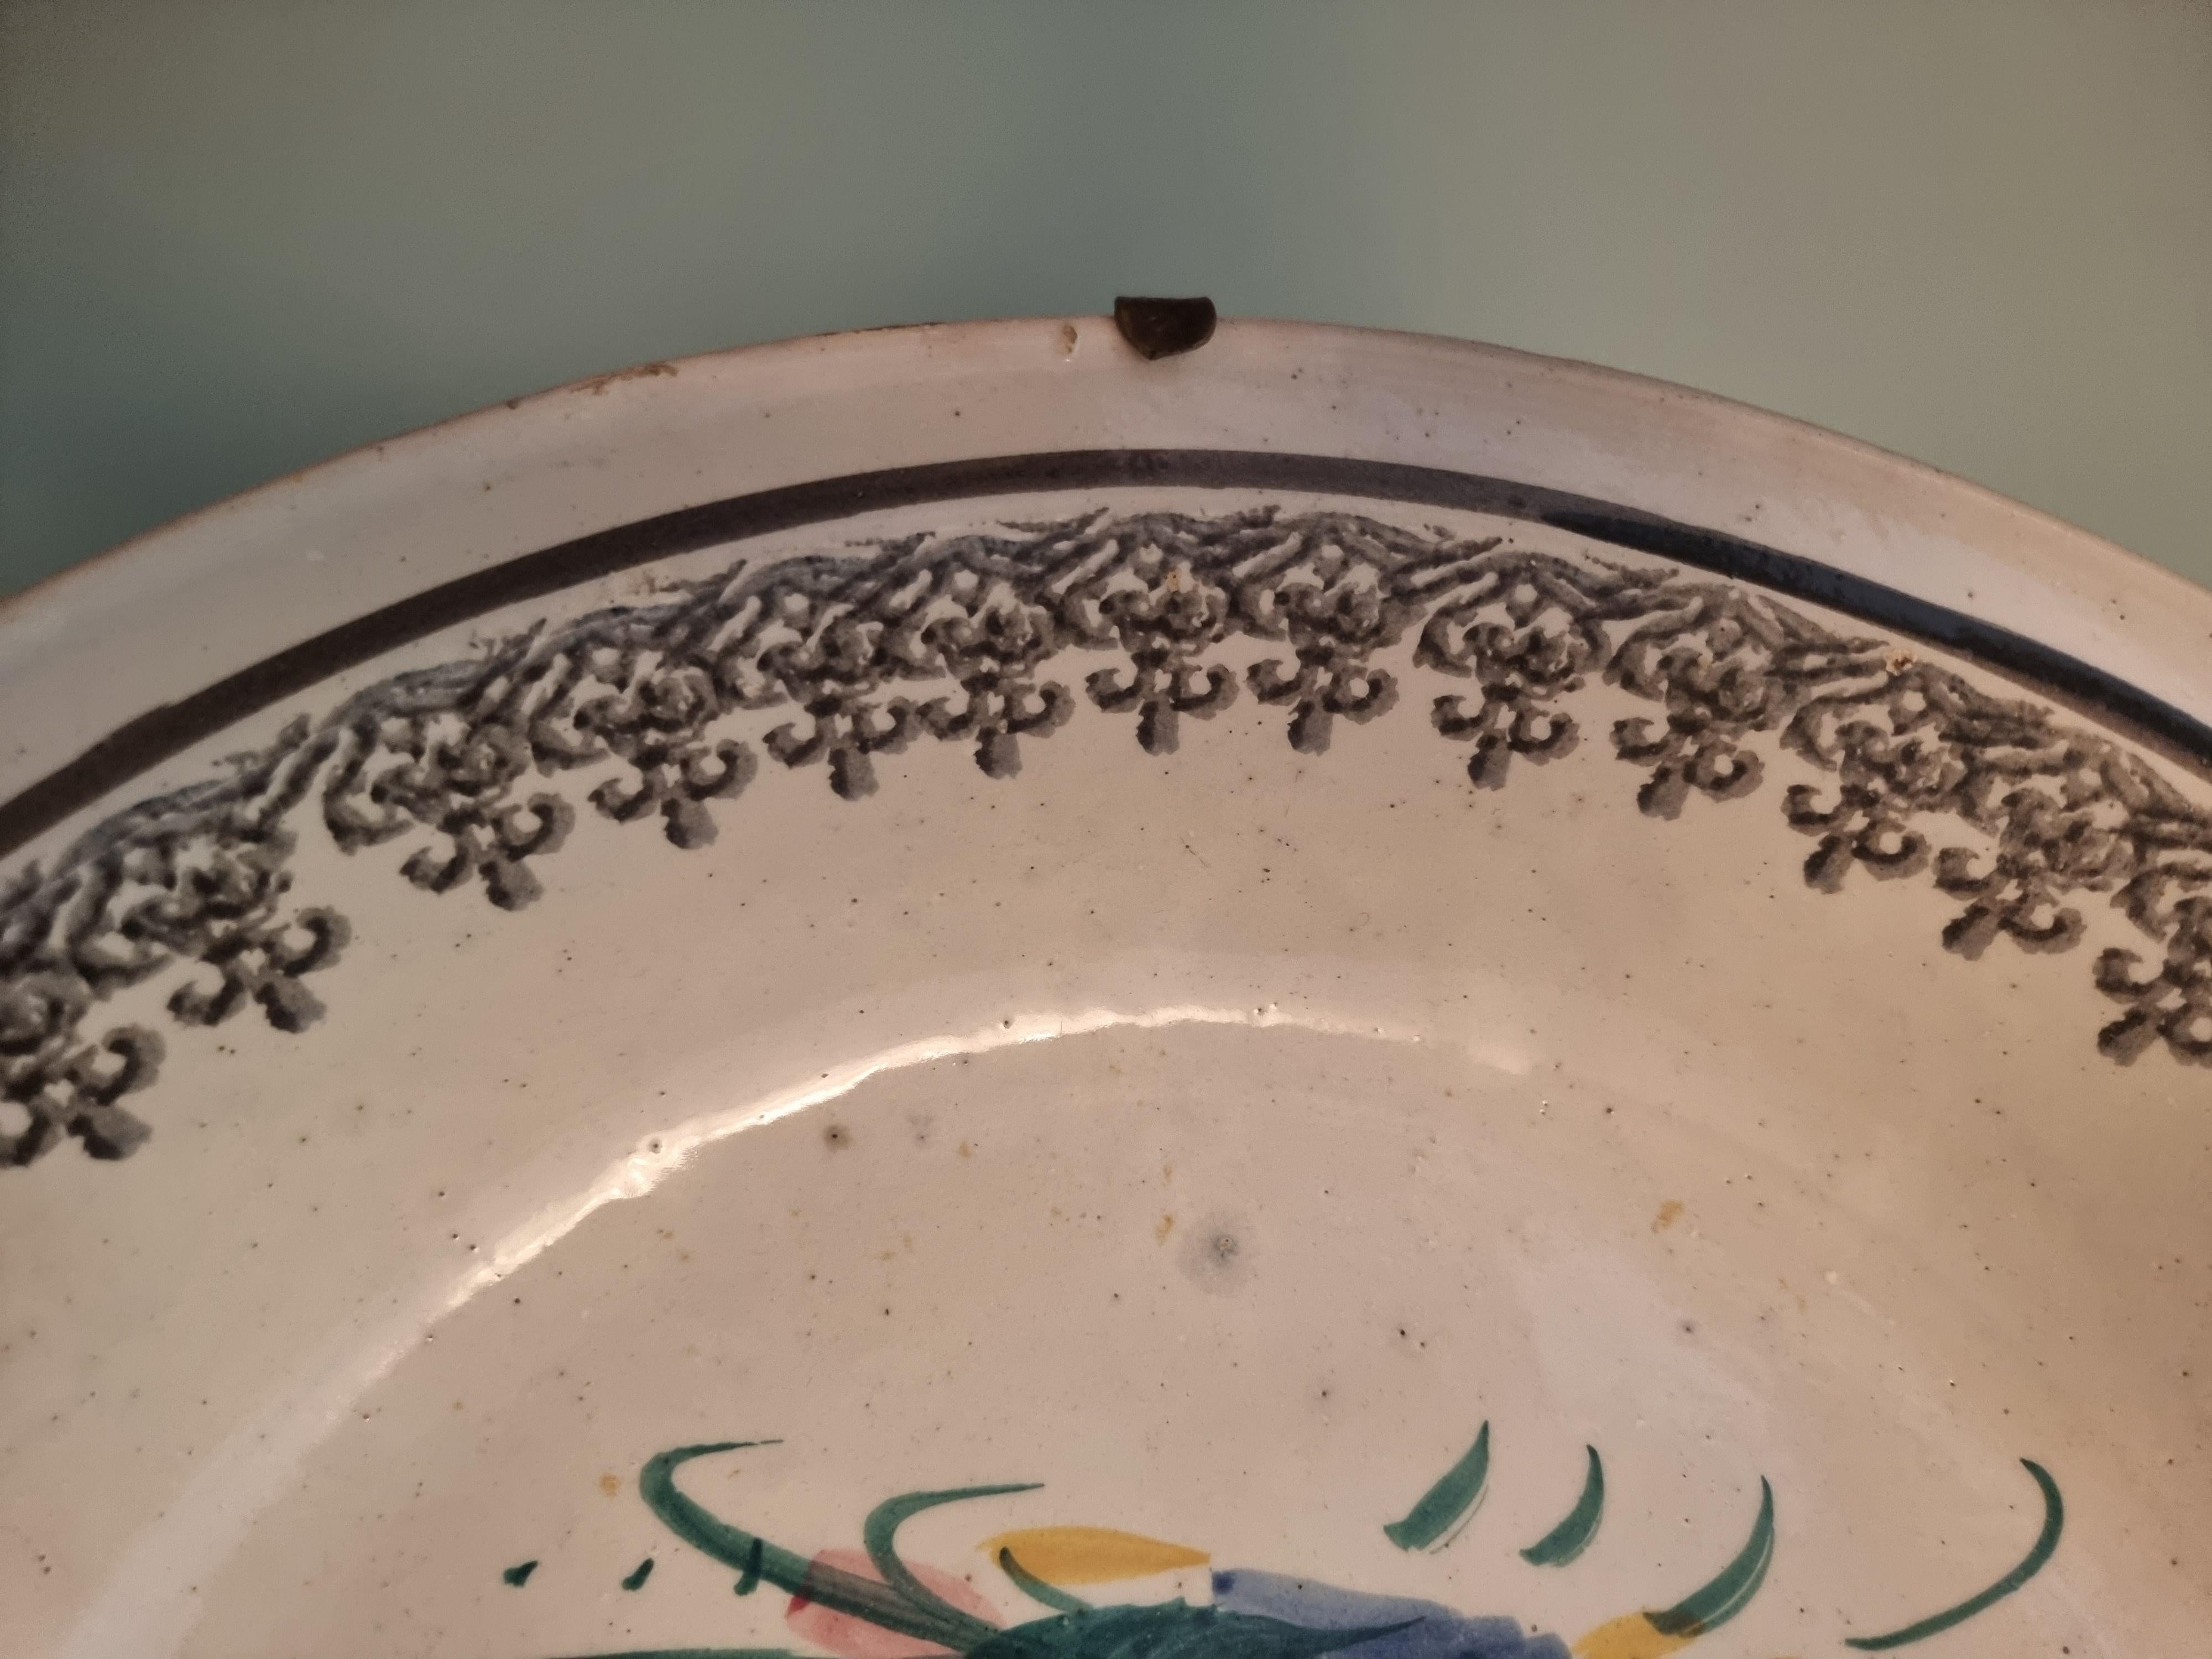 Antique Ceramic Hanging Bowl with Pear Decorations, Italy, 19th Century 1